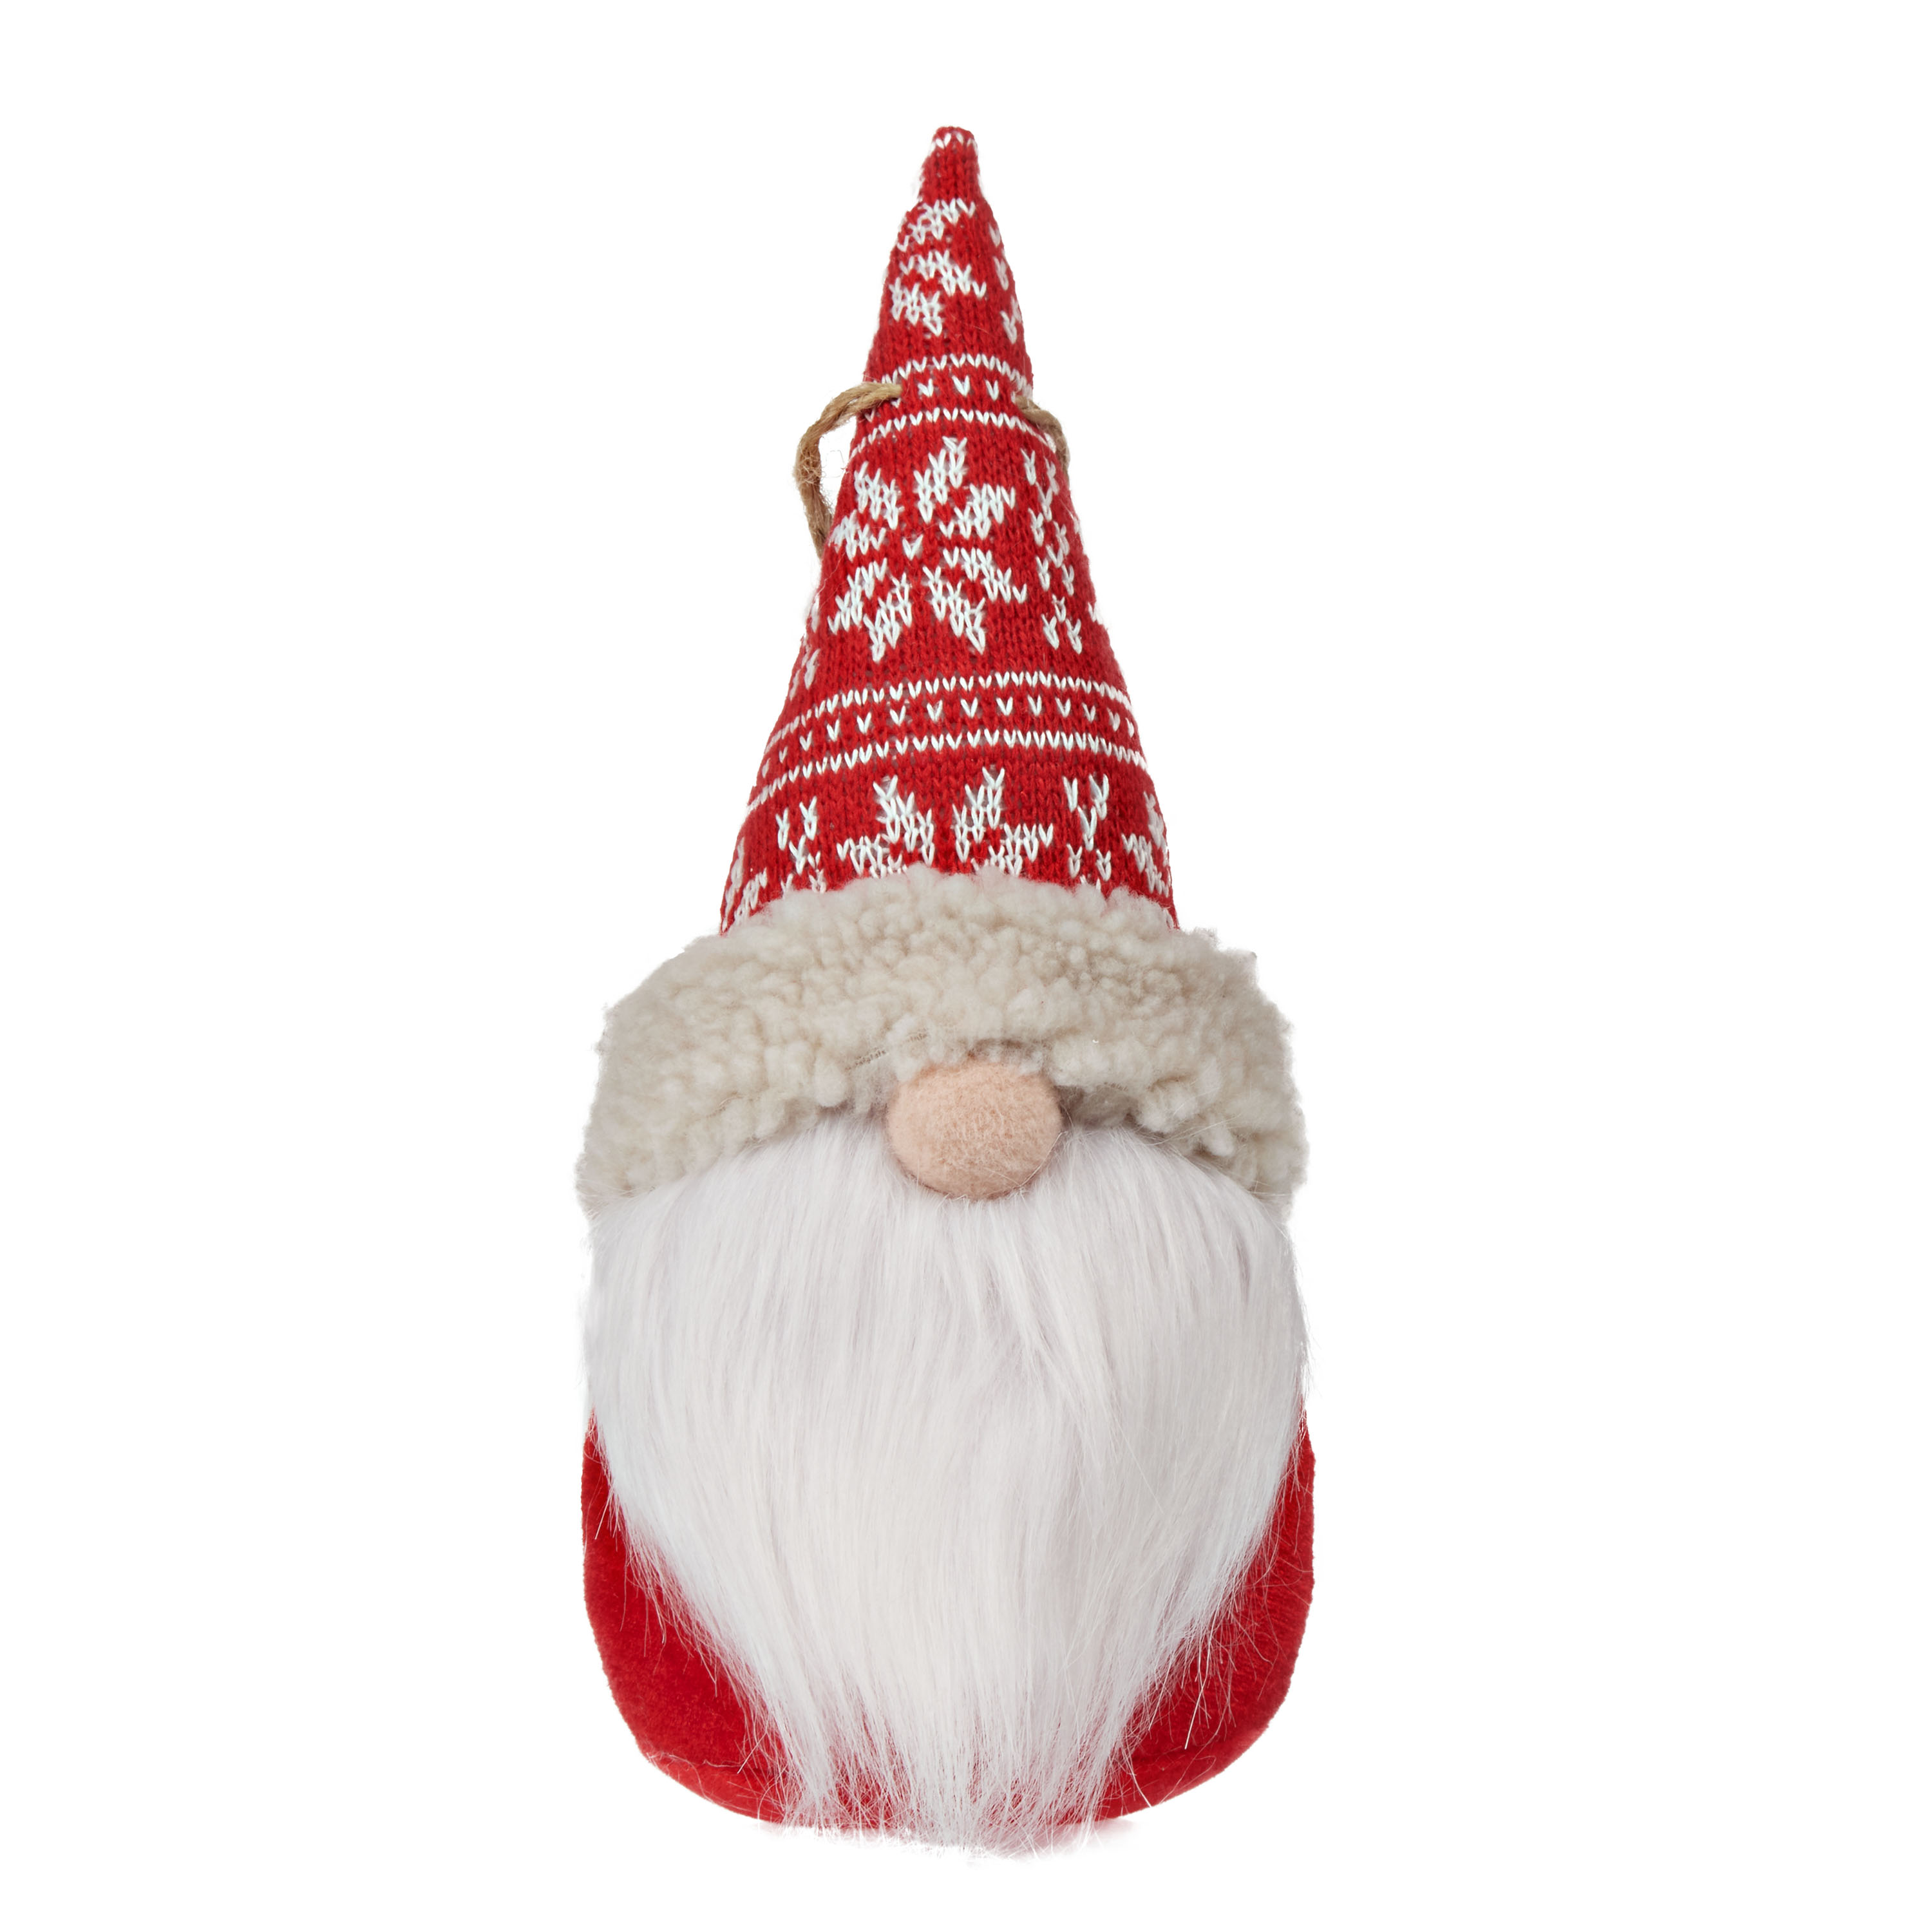 Holiday Time Jumbo Red and White Fabric Gnome Ornament - image 1 of 1